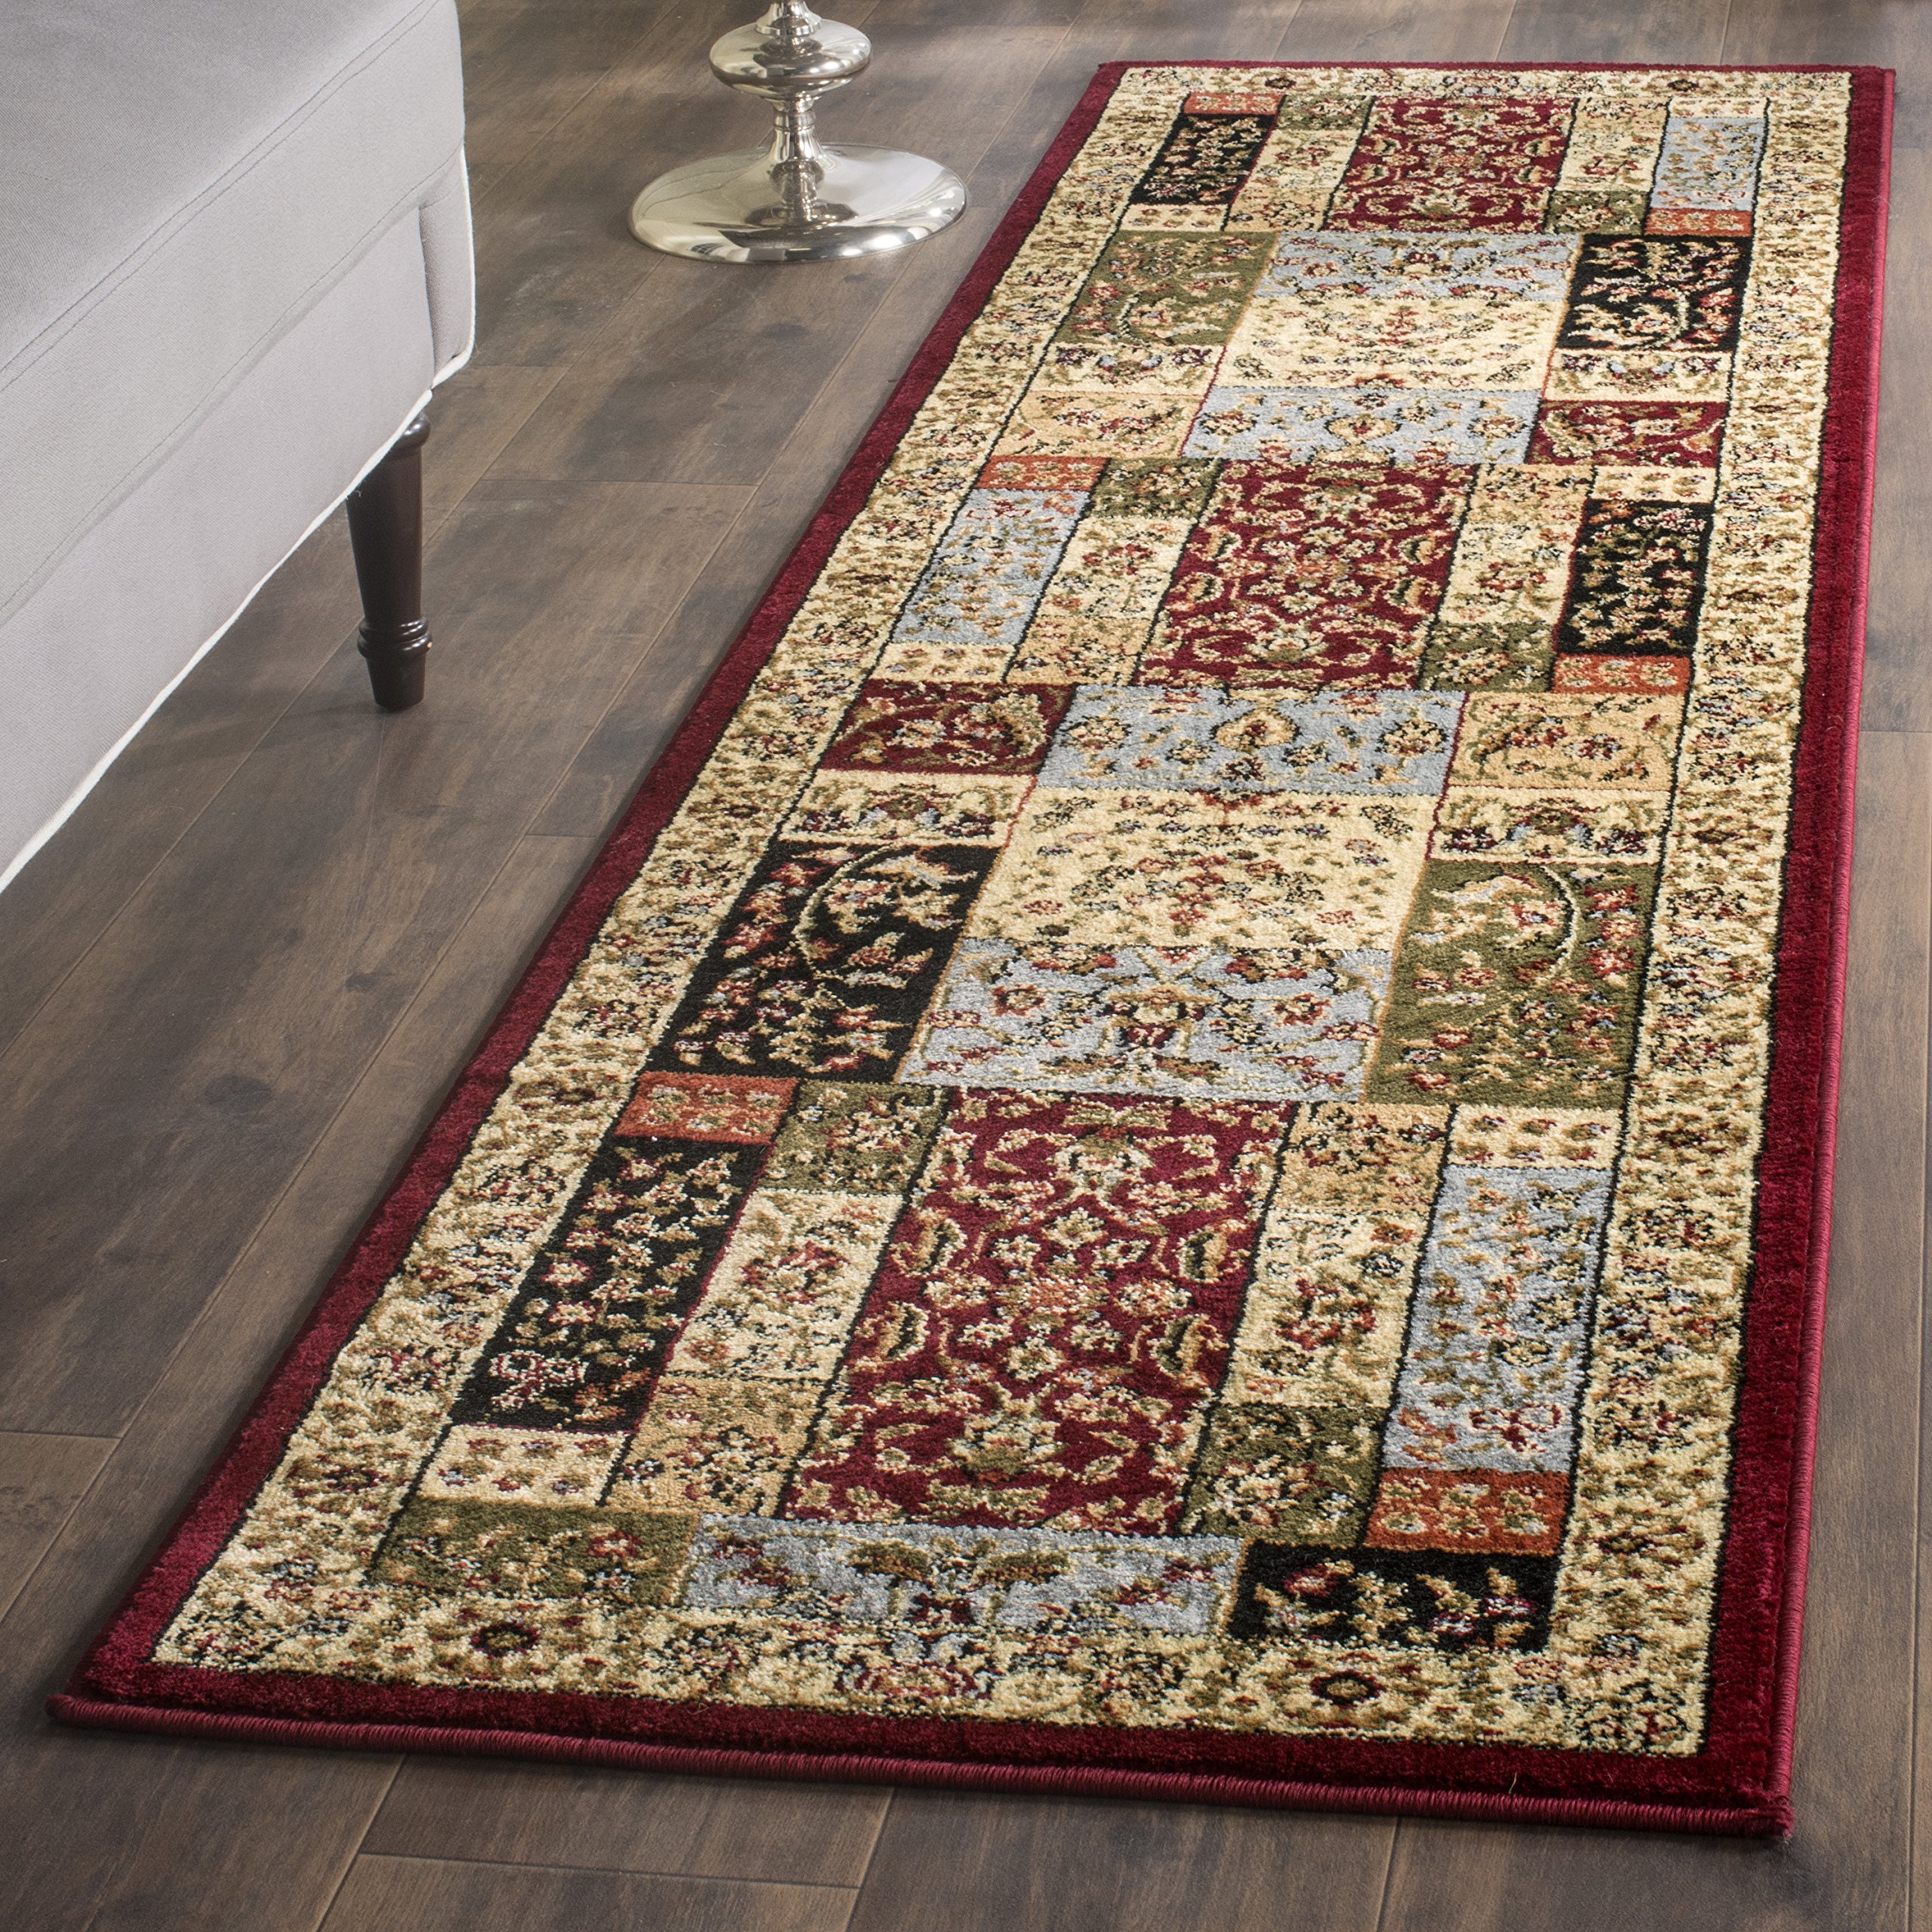 SAFAVIEH Lyndhurst Collection 2'3" x 8' Multi / Ivory LNH318A Traditional Oriental Non-Shedding Living Room Entryway Foyer Hallway Bedr...